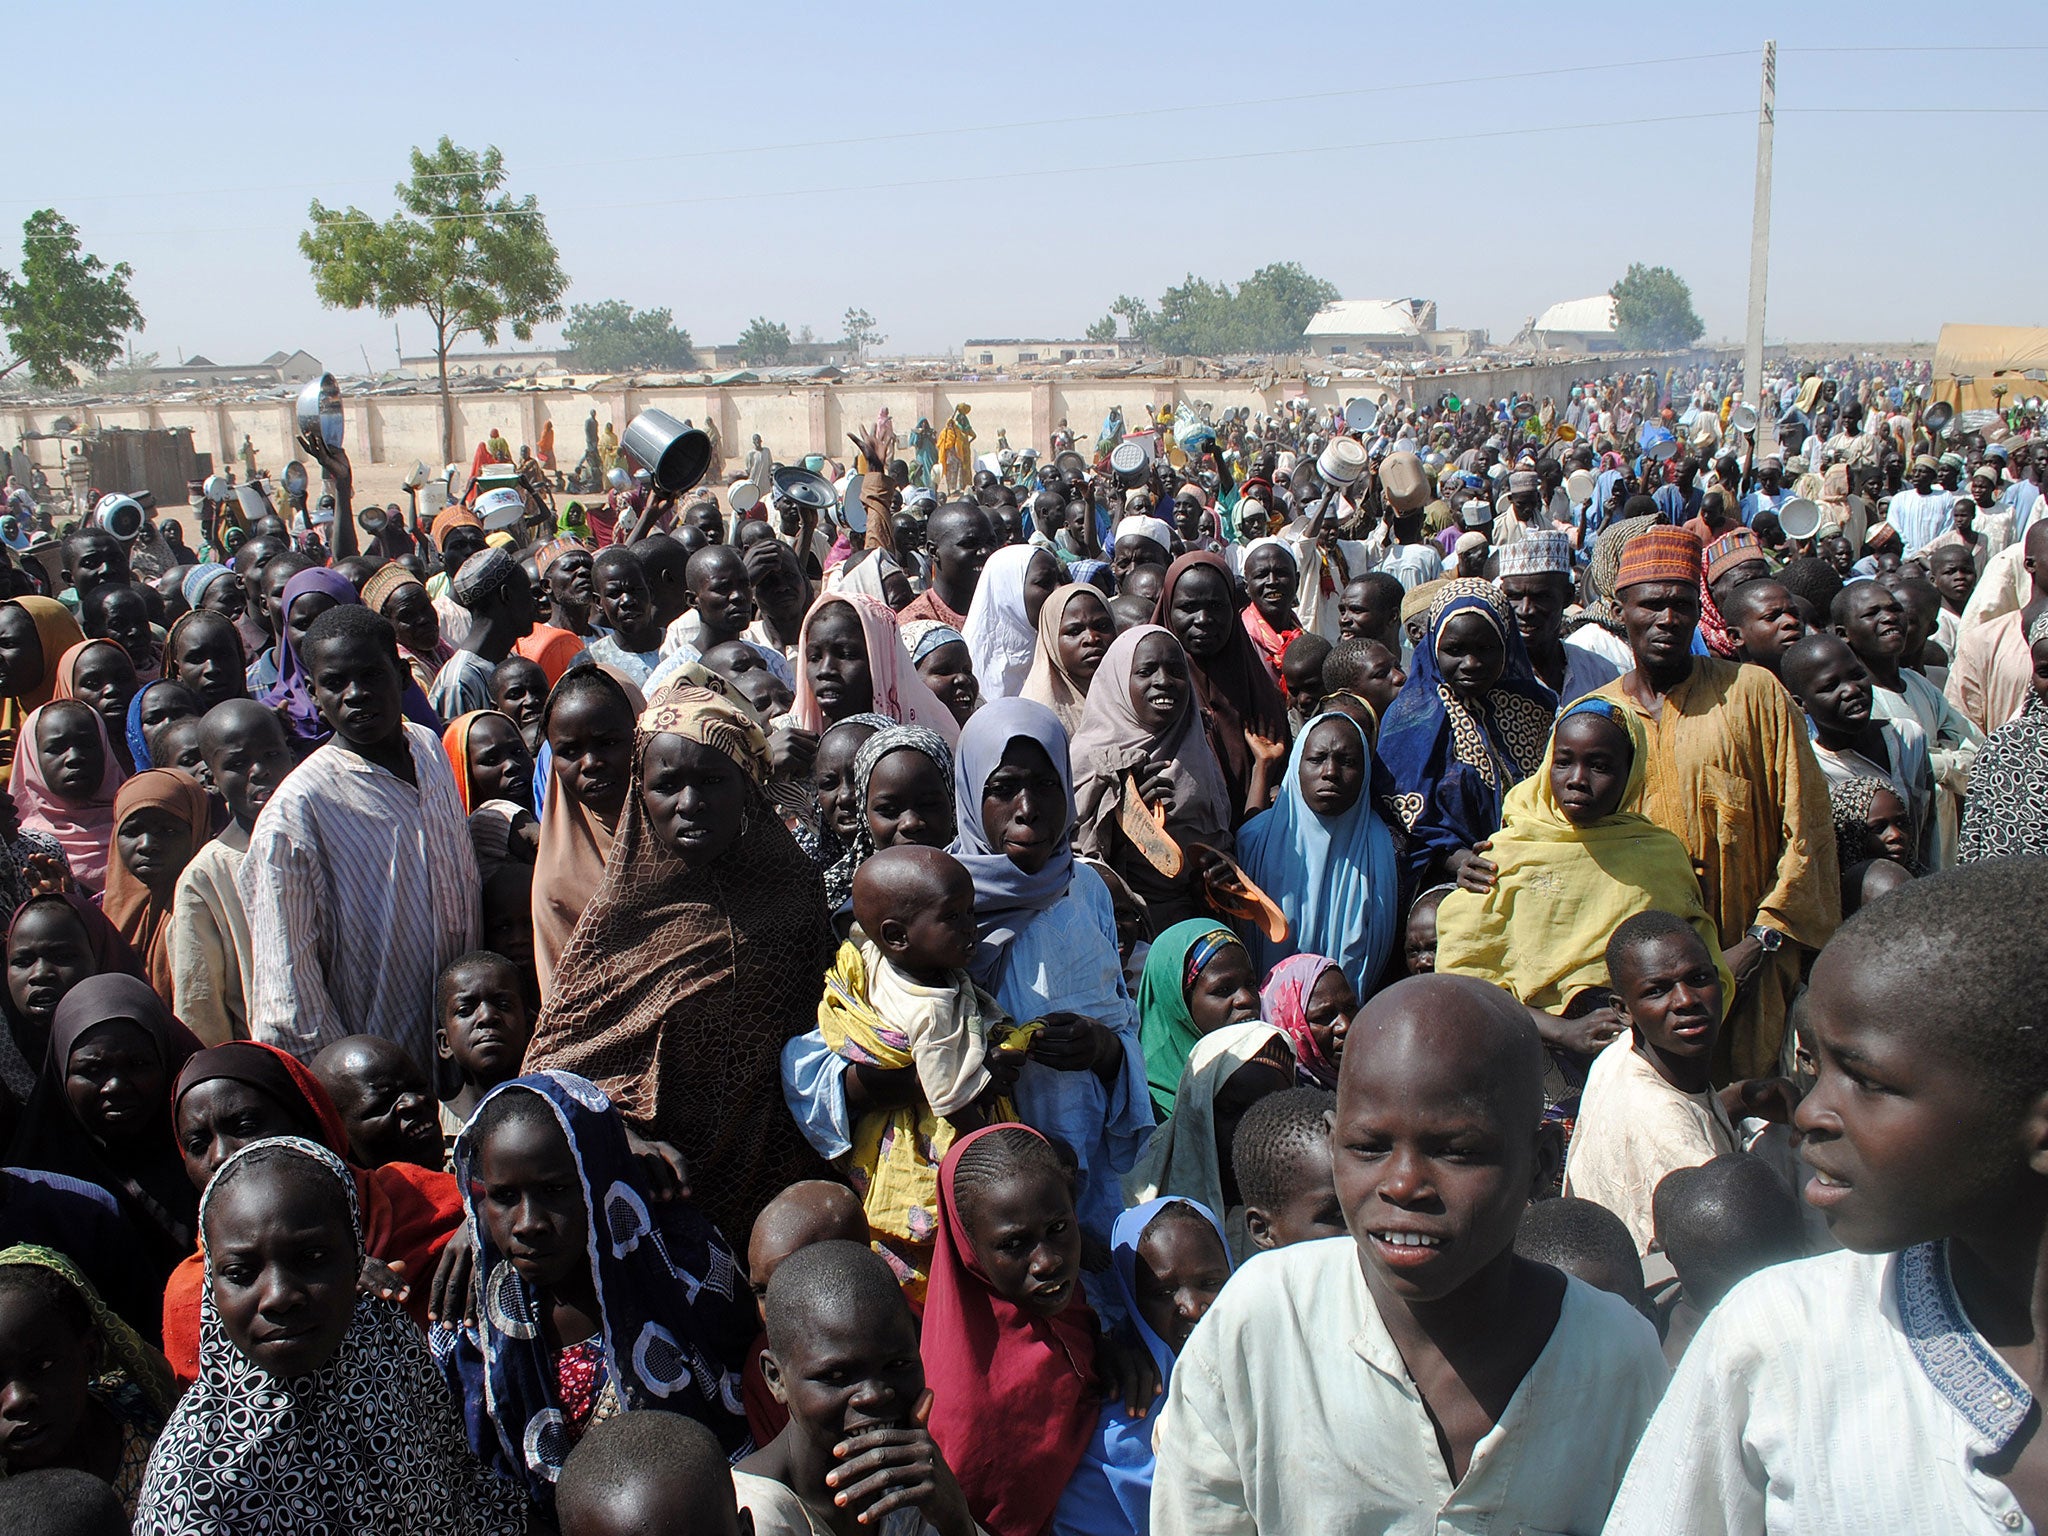 Internally Displaced Persons (IDP) mostly women and children stand waiting for food at Dikwa Camp, in Borno State in north-eastern Nigeria, on 2 February, 2016